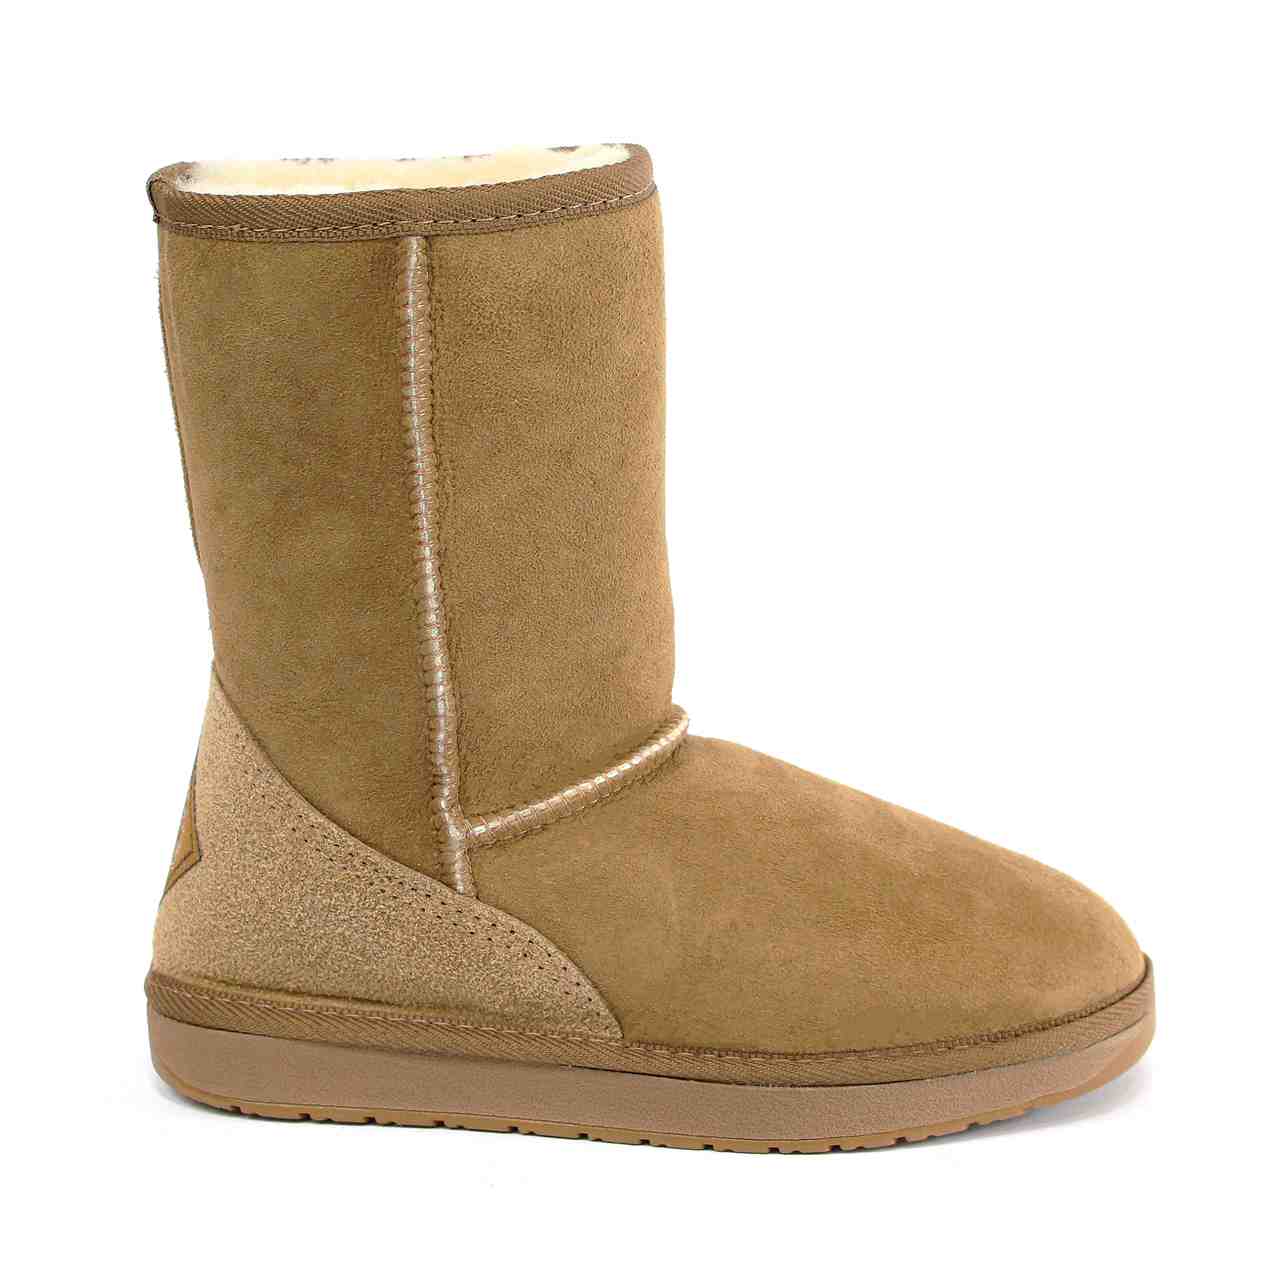 3/4 Classic Ugg Boots (Chestnut)